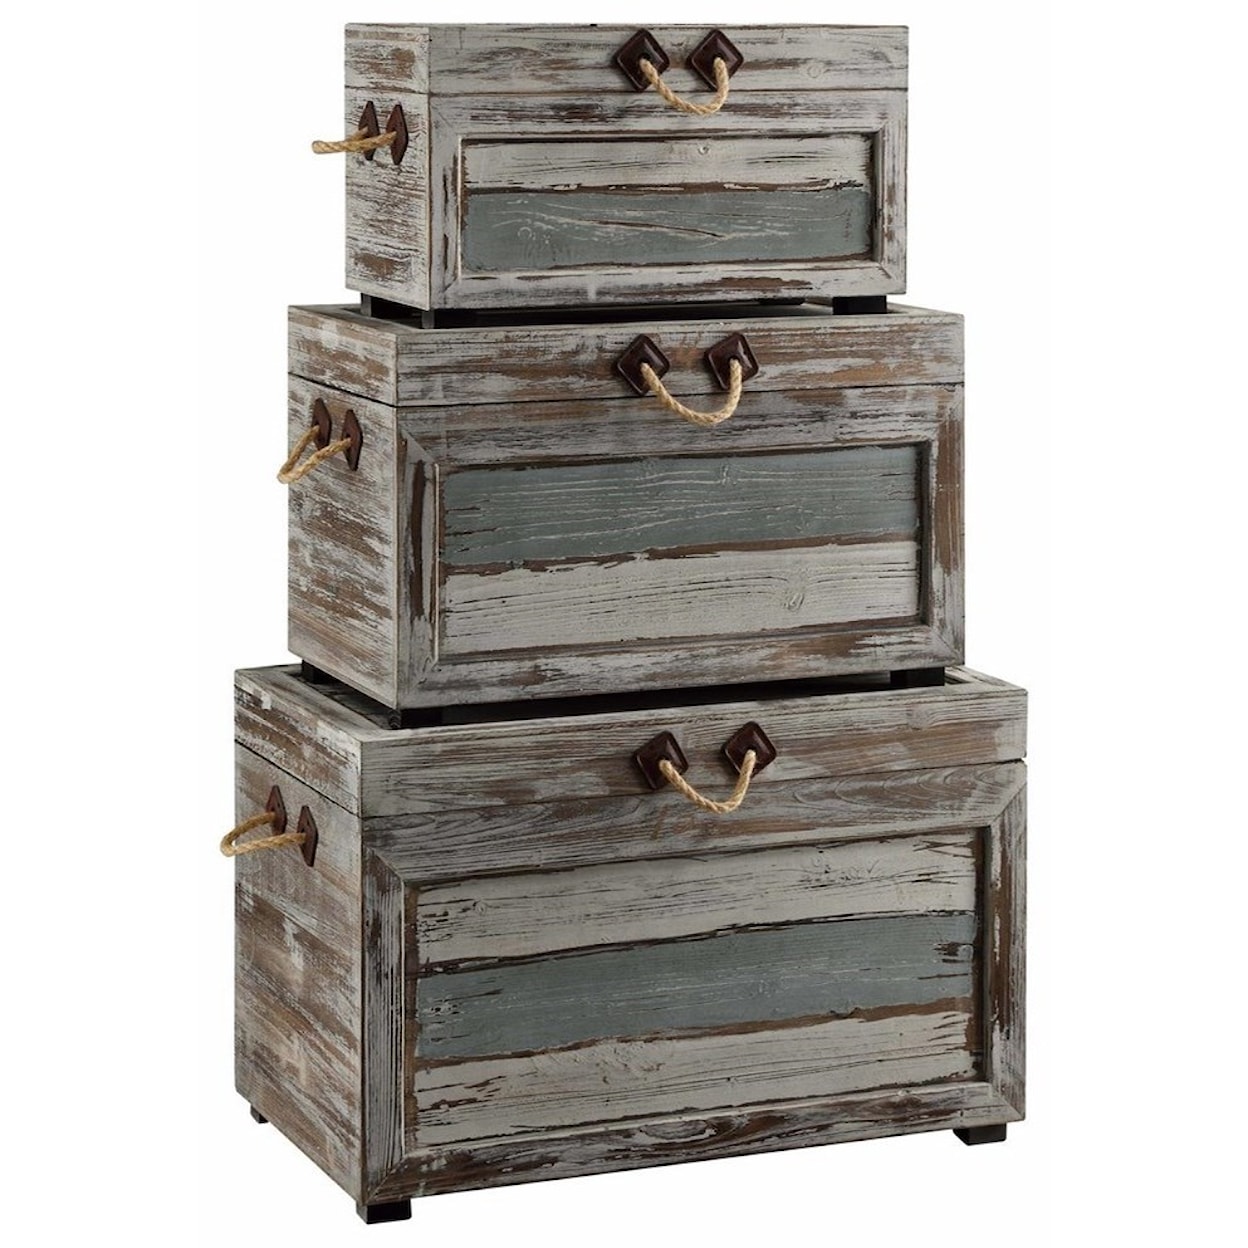 Crestview Collection Accent Furniture Nantucket Weathered Wood Trunks